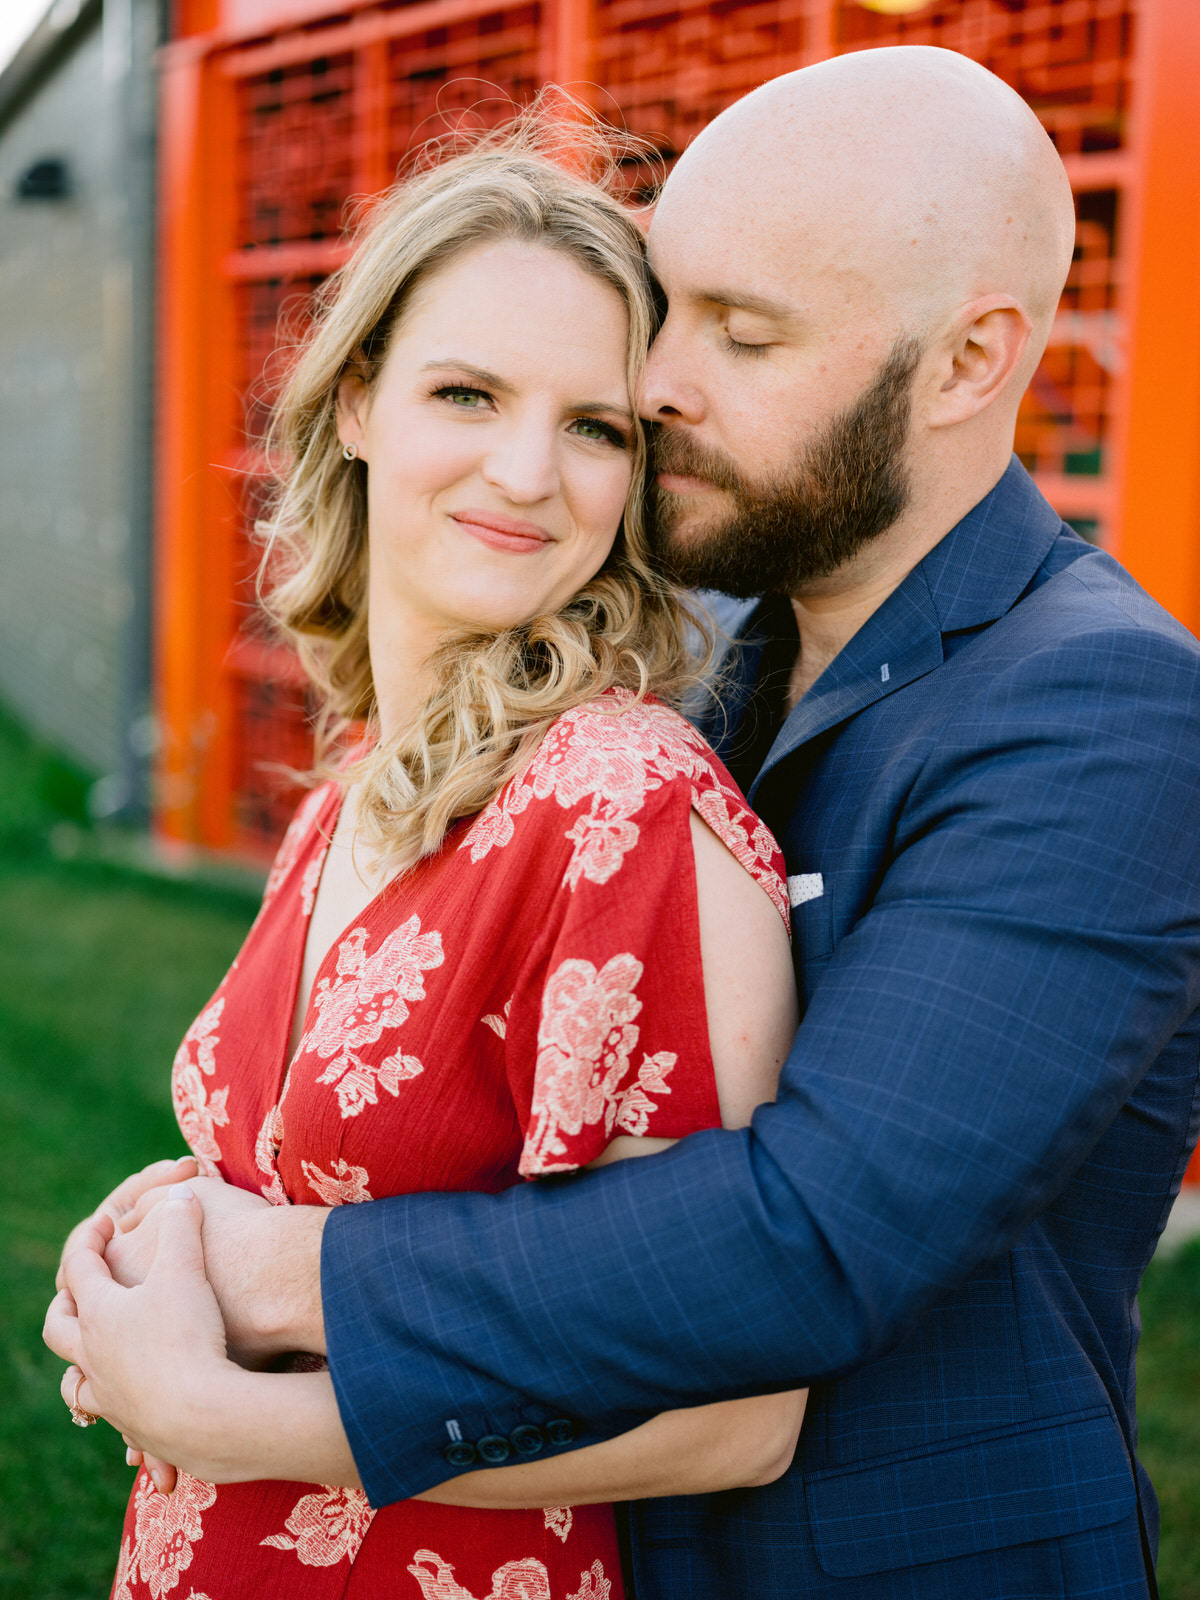 Couple cuddles in front of orange structure at Ping Tom Memorial Park for Chicago engagement session locations. Wedding photography by Michael & Kristin Photo and Video